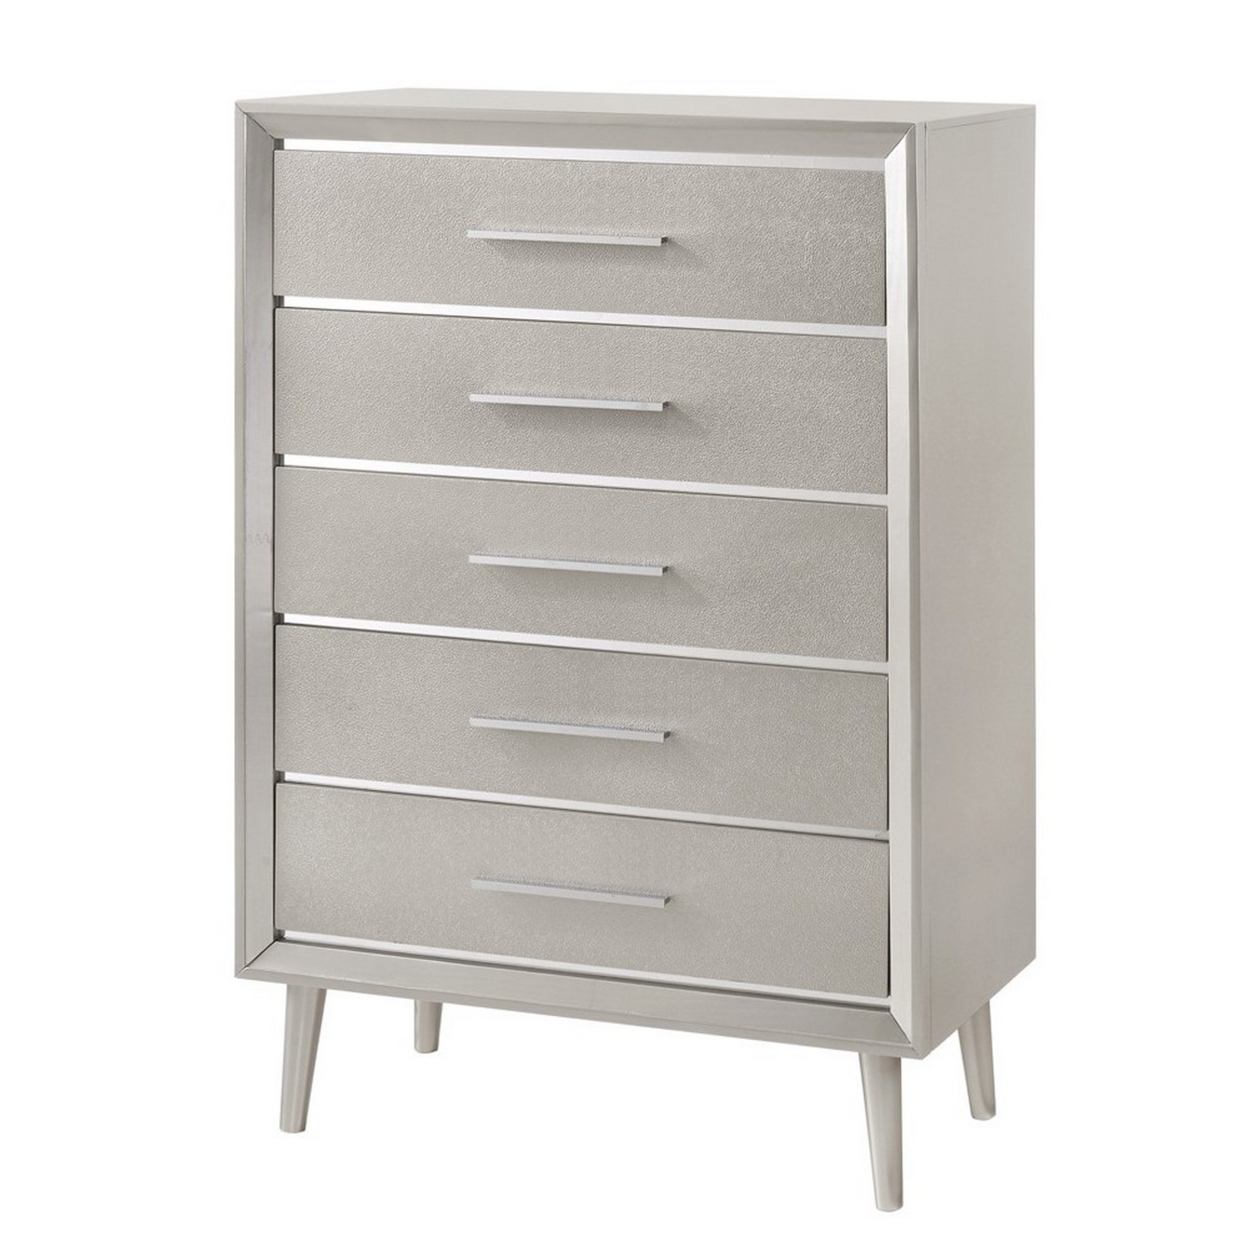 5 Drawer Contemporary Chest With Bar Handles And Splayed Legs, Silver- Saltoro Sherpi